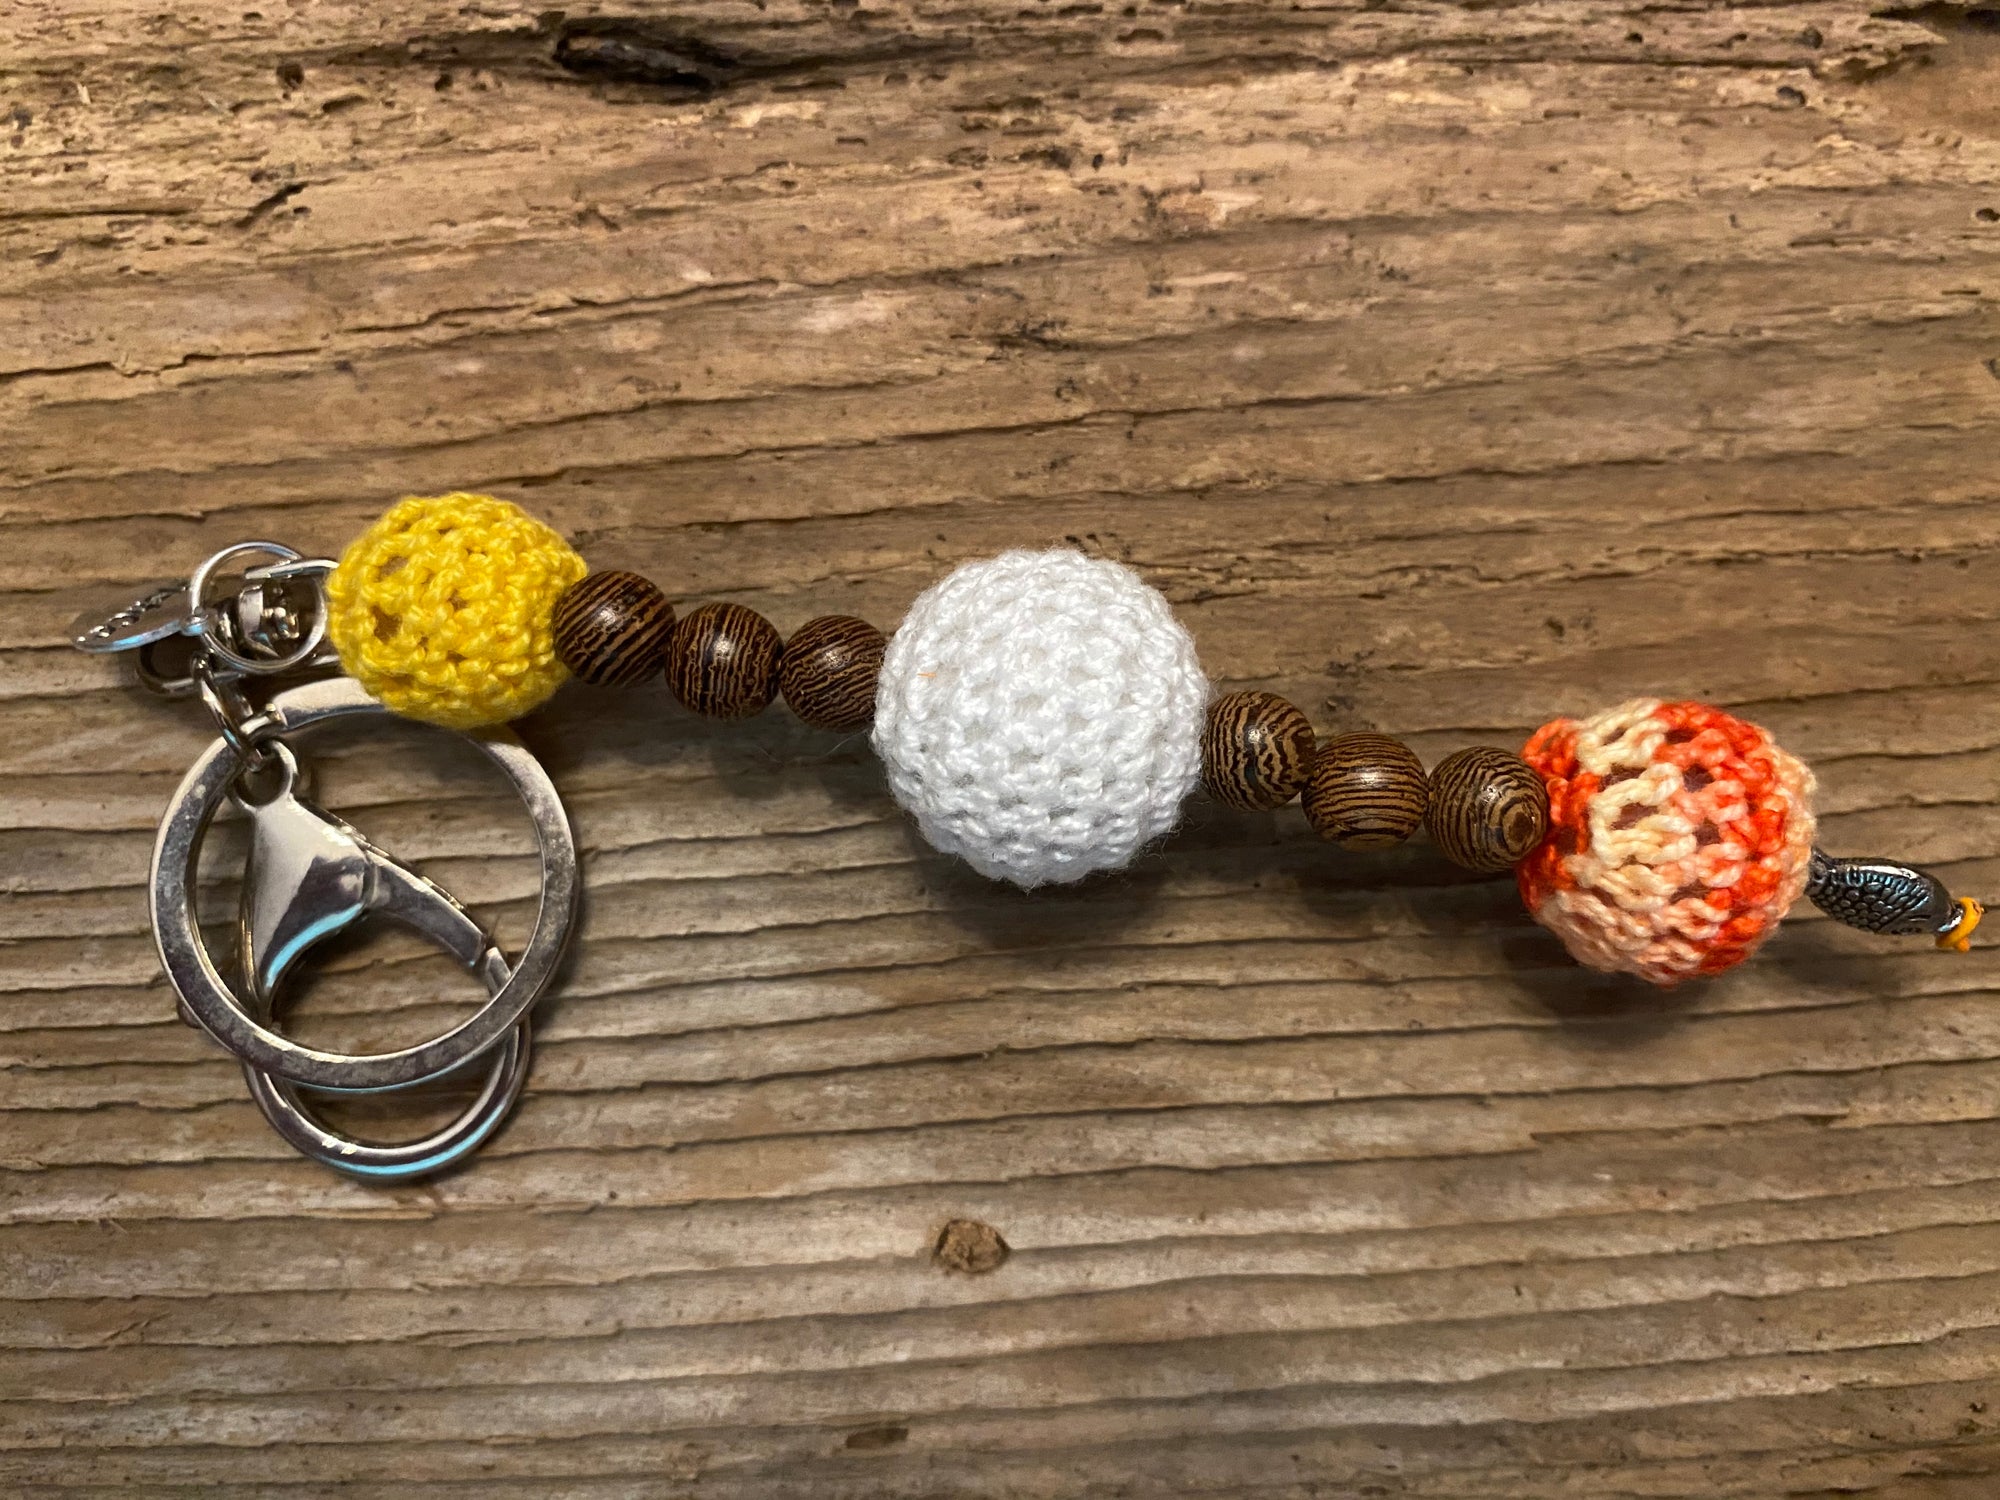 Shanga Keychain yellow, white and orange macramé beads with carved wooden accents